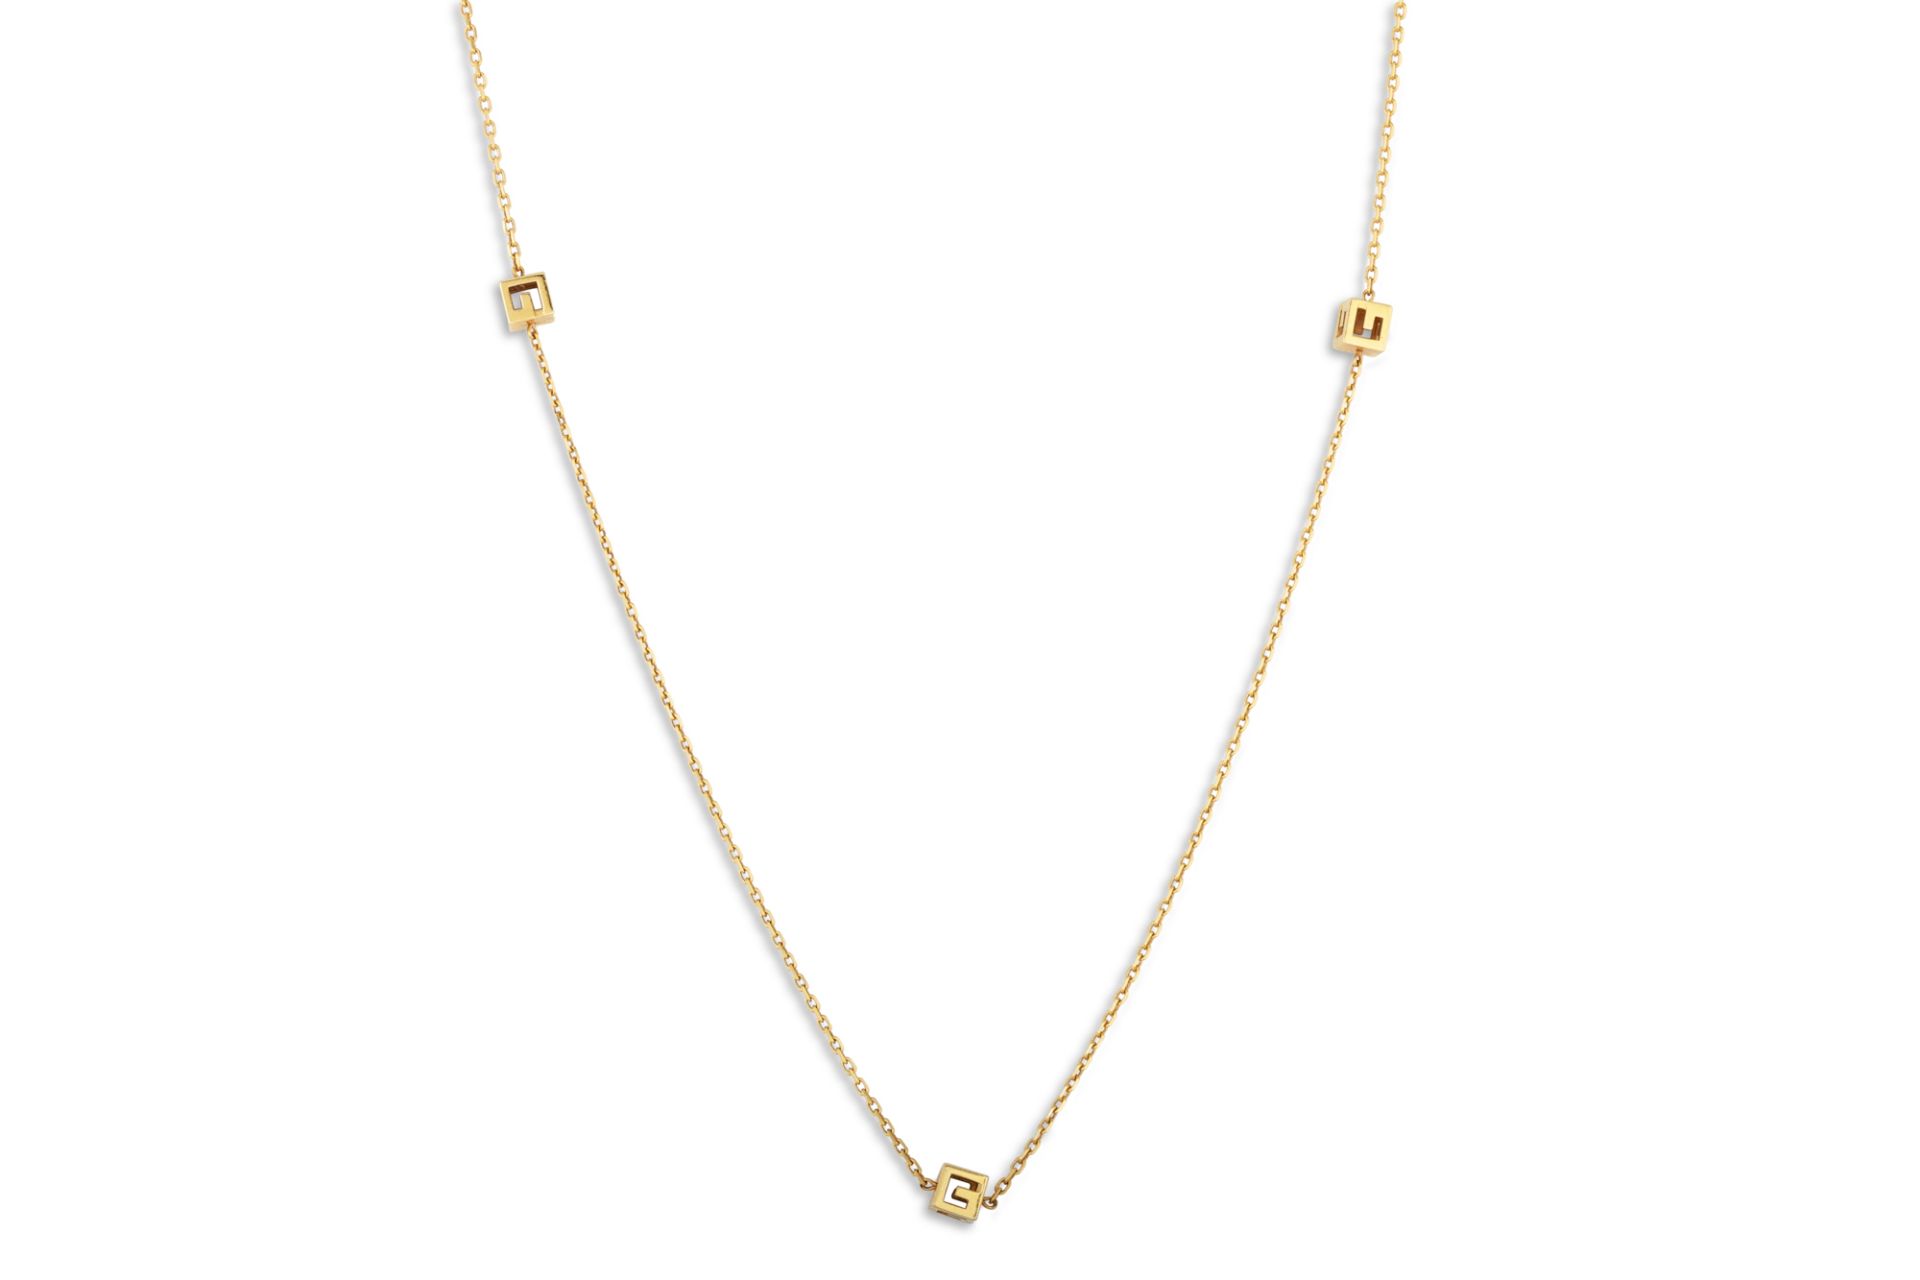 AN 18CT GOLD GUCCI LARIAT NECKLACE, original box, 16.4 g.